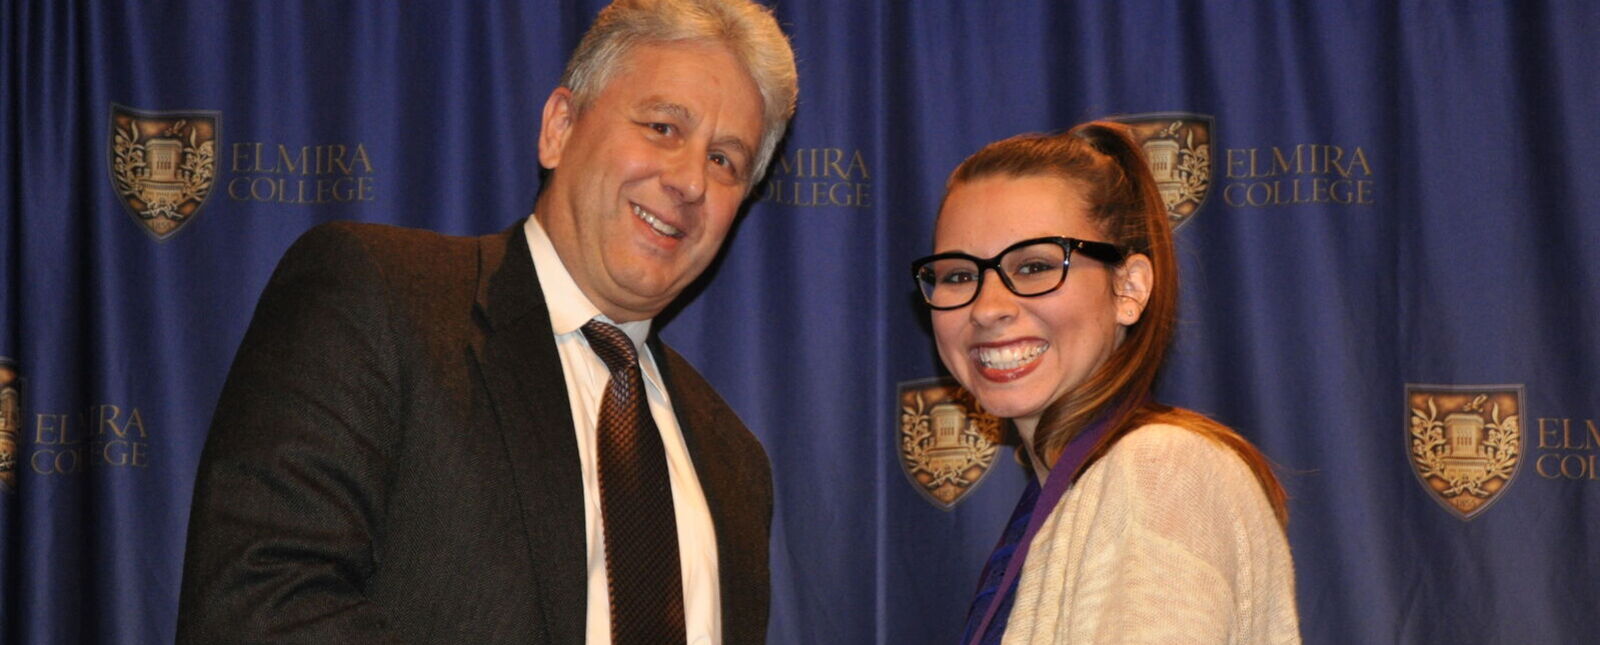 President Lindsey shakes hands with a female student during a recognition ceremony